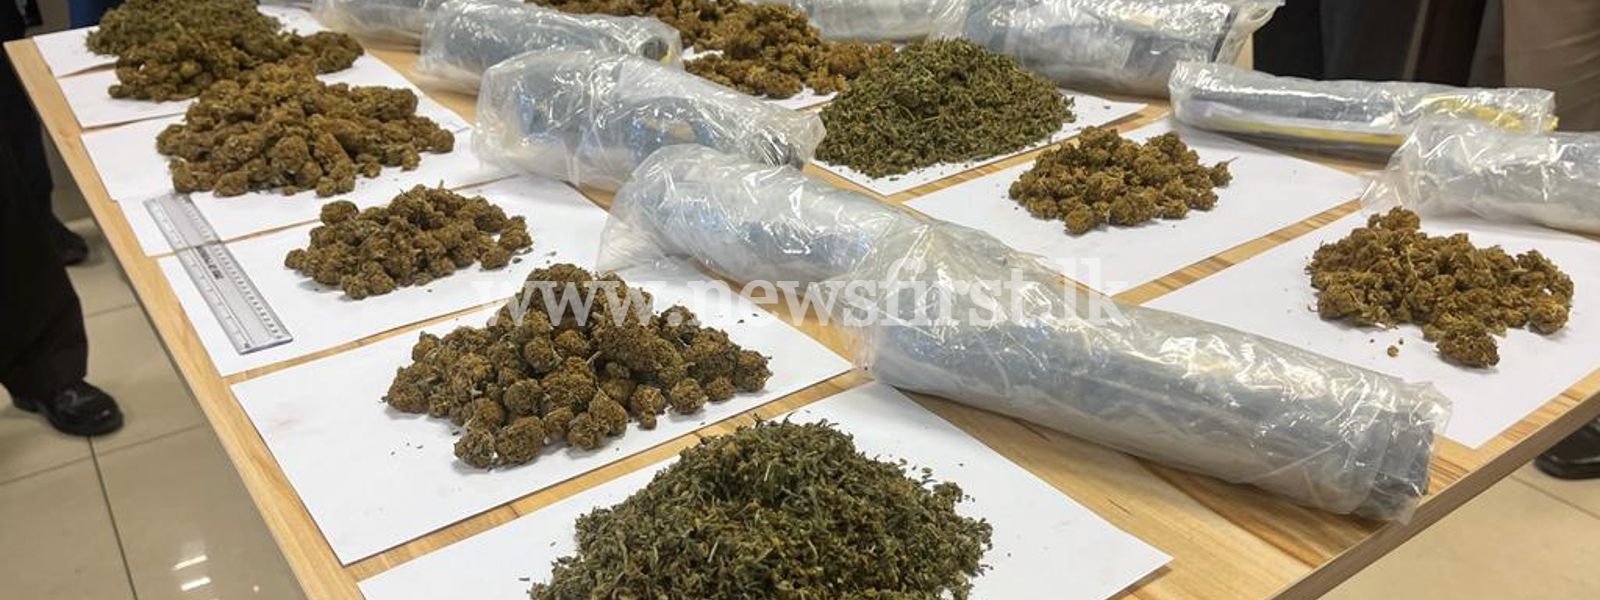 Customs seizes 13 parcels with drugs